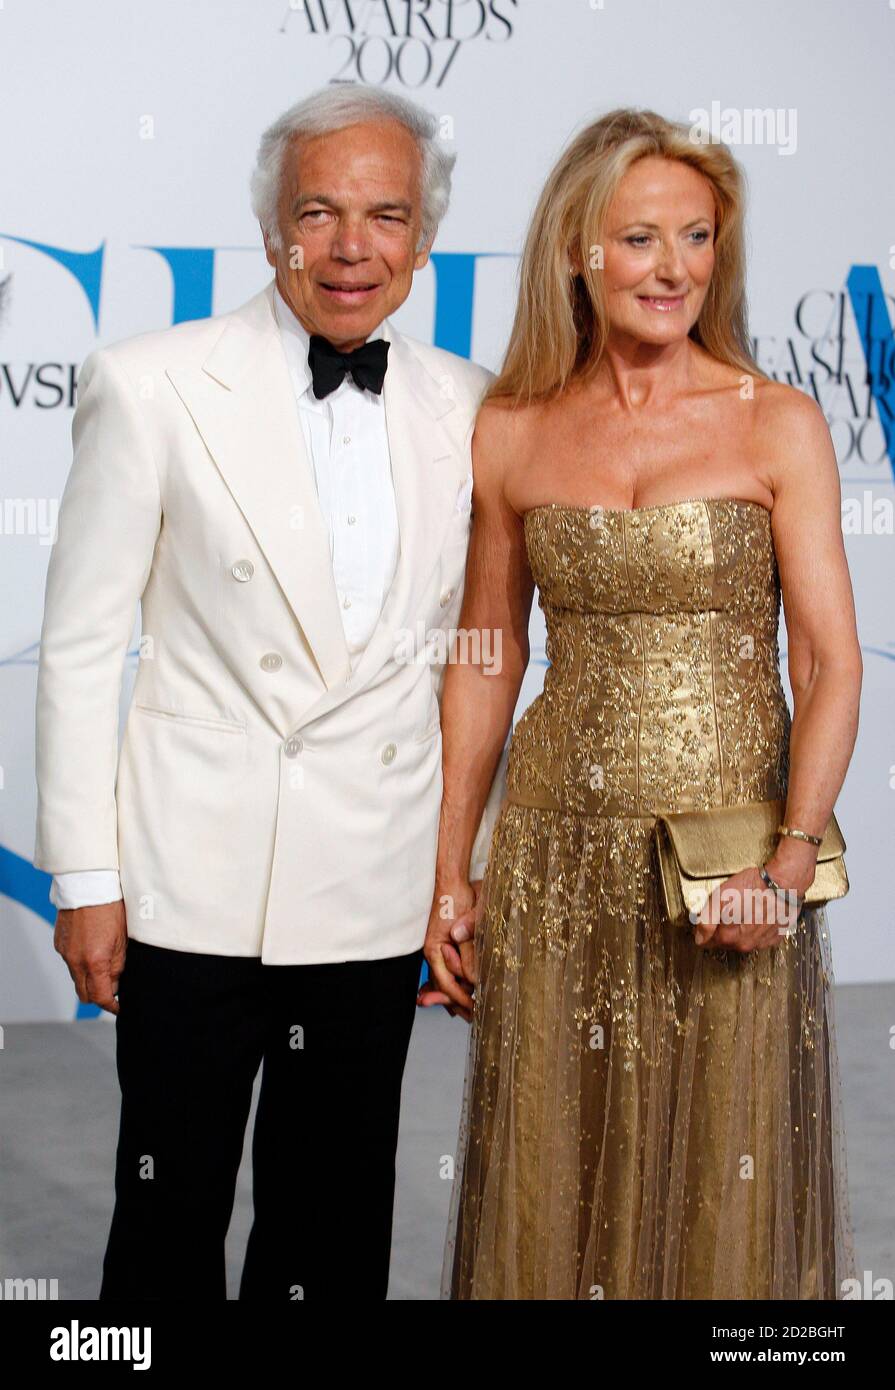 Designer Ralph Lauren and his wife Ricky Low-Beer arrive to attend the 2007  CFDA Fashion Awards in New York June 4, 2007. REUTERS/Lucas Jackson (UNITED  STATES Stock Photo - Alamy